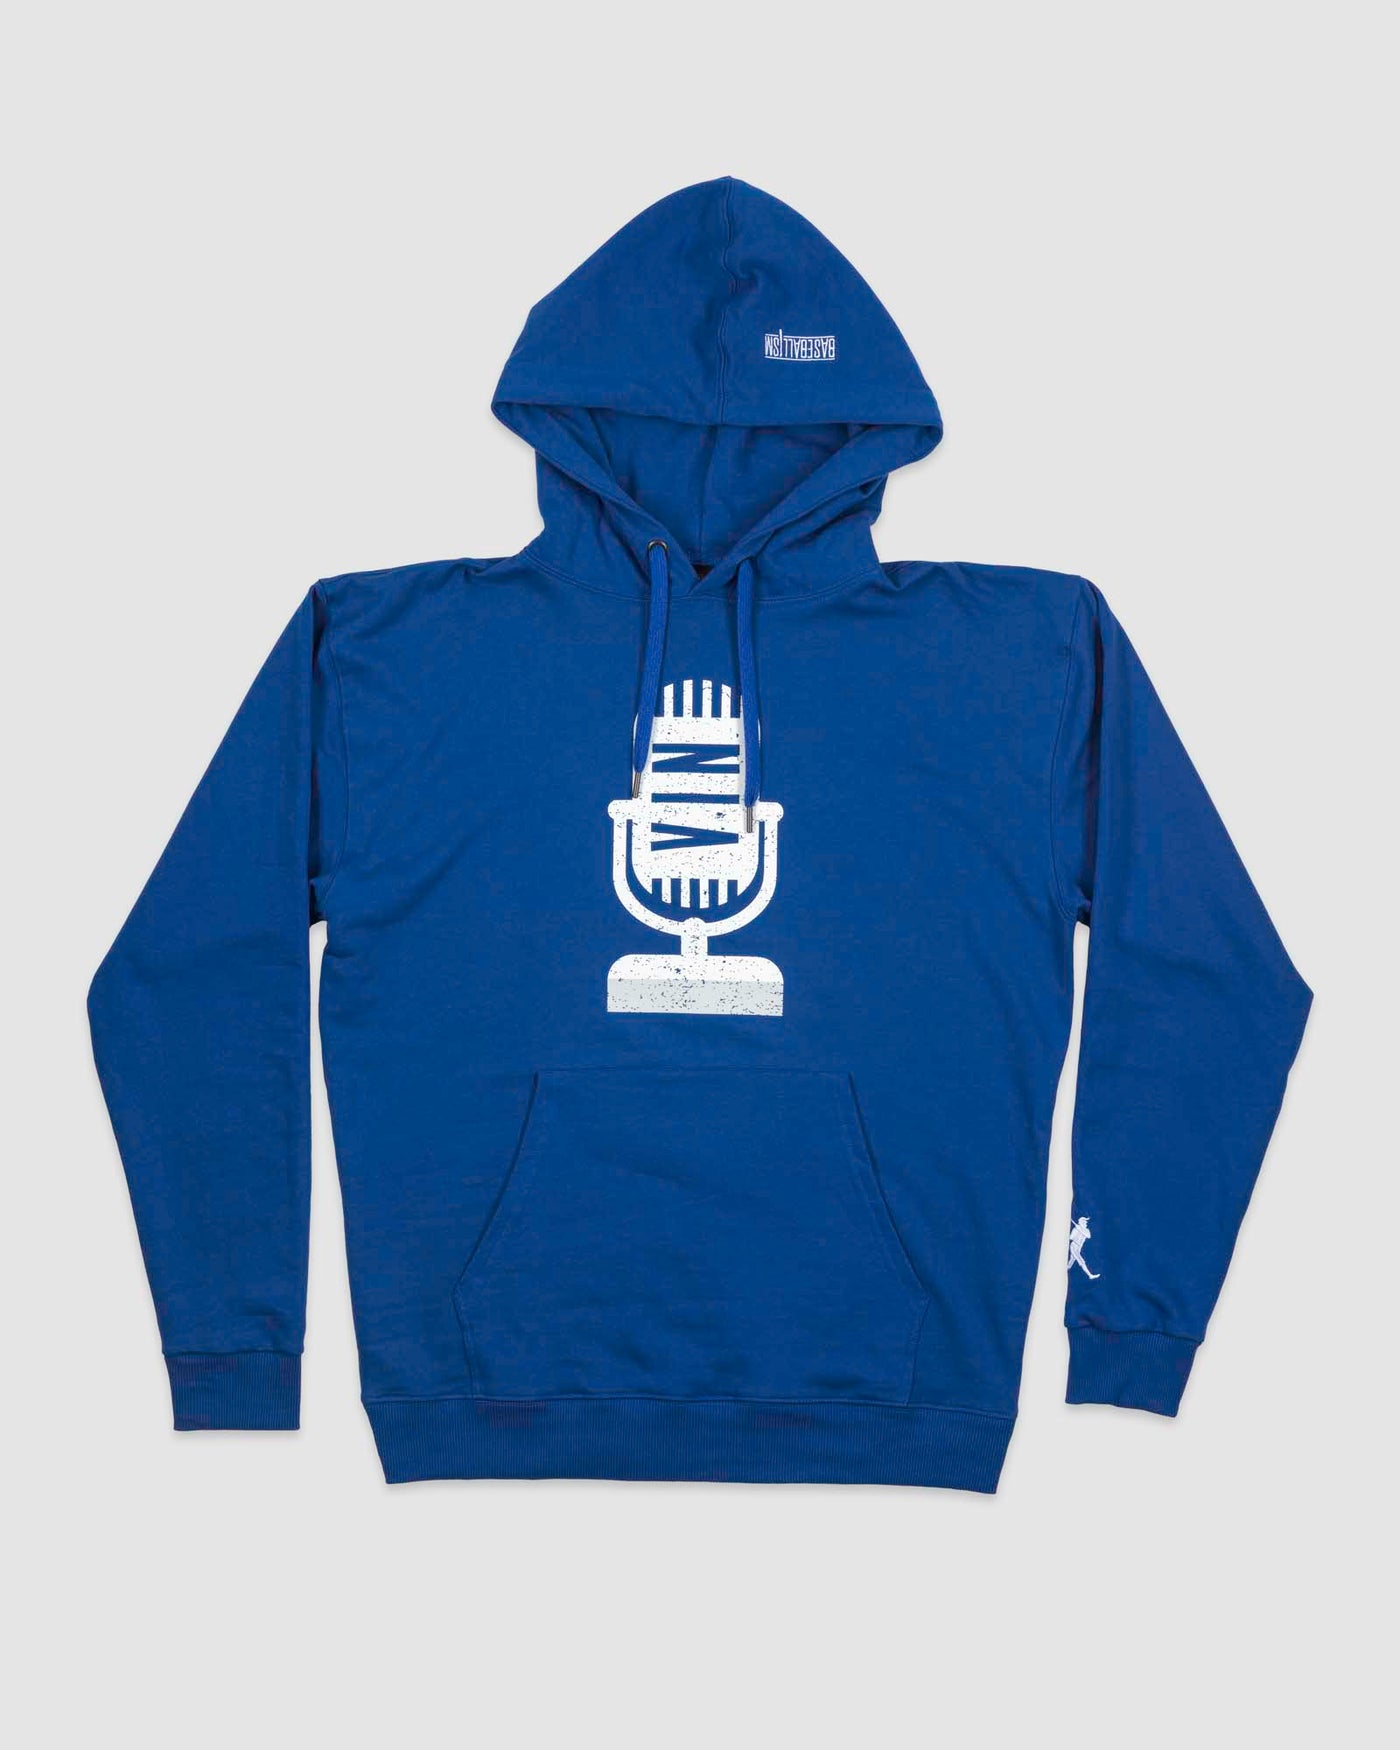 Vin's Mic Standard Hoodie - Vin Scully Collection